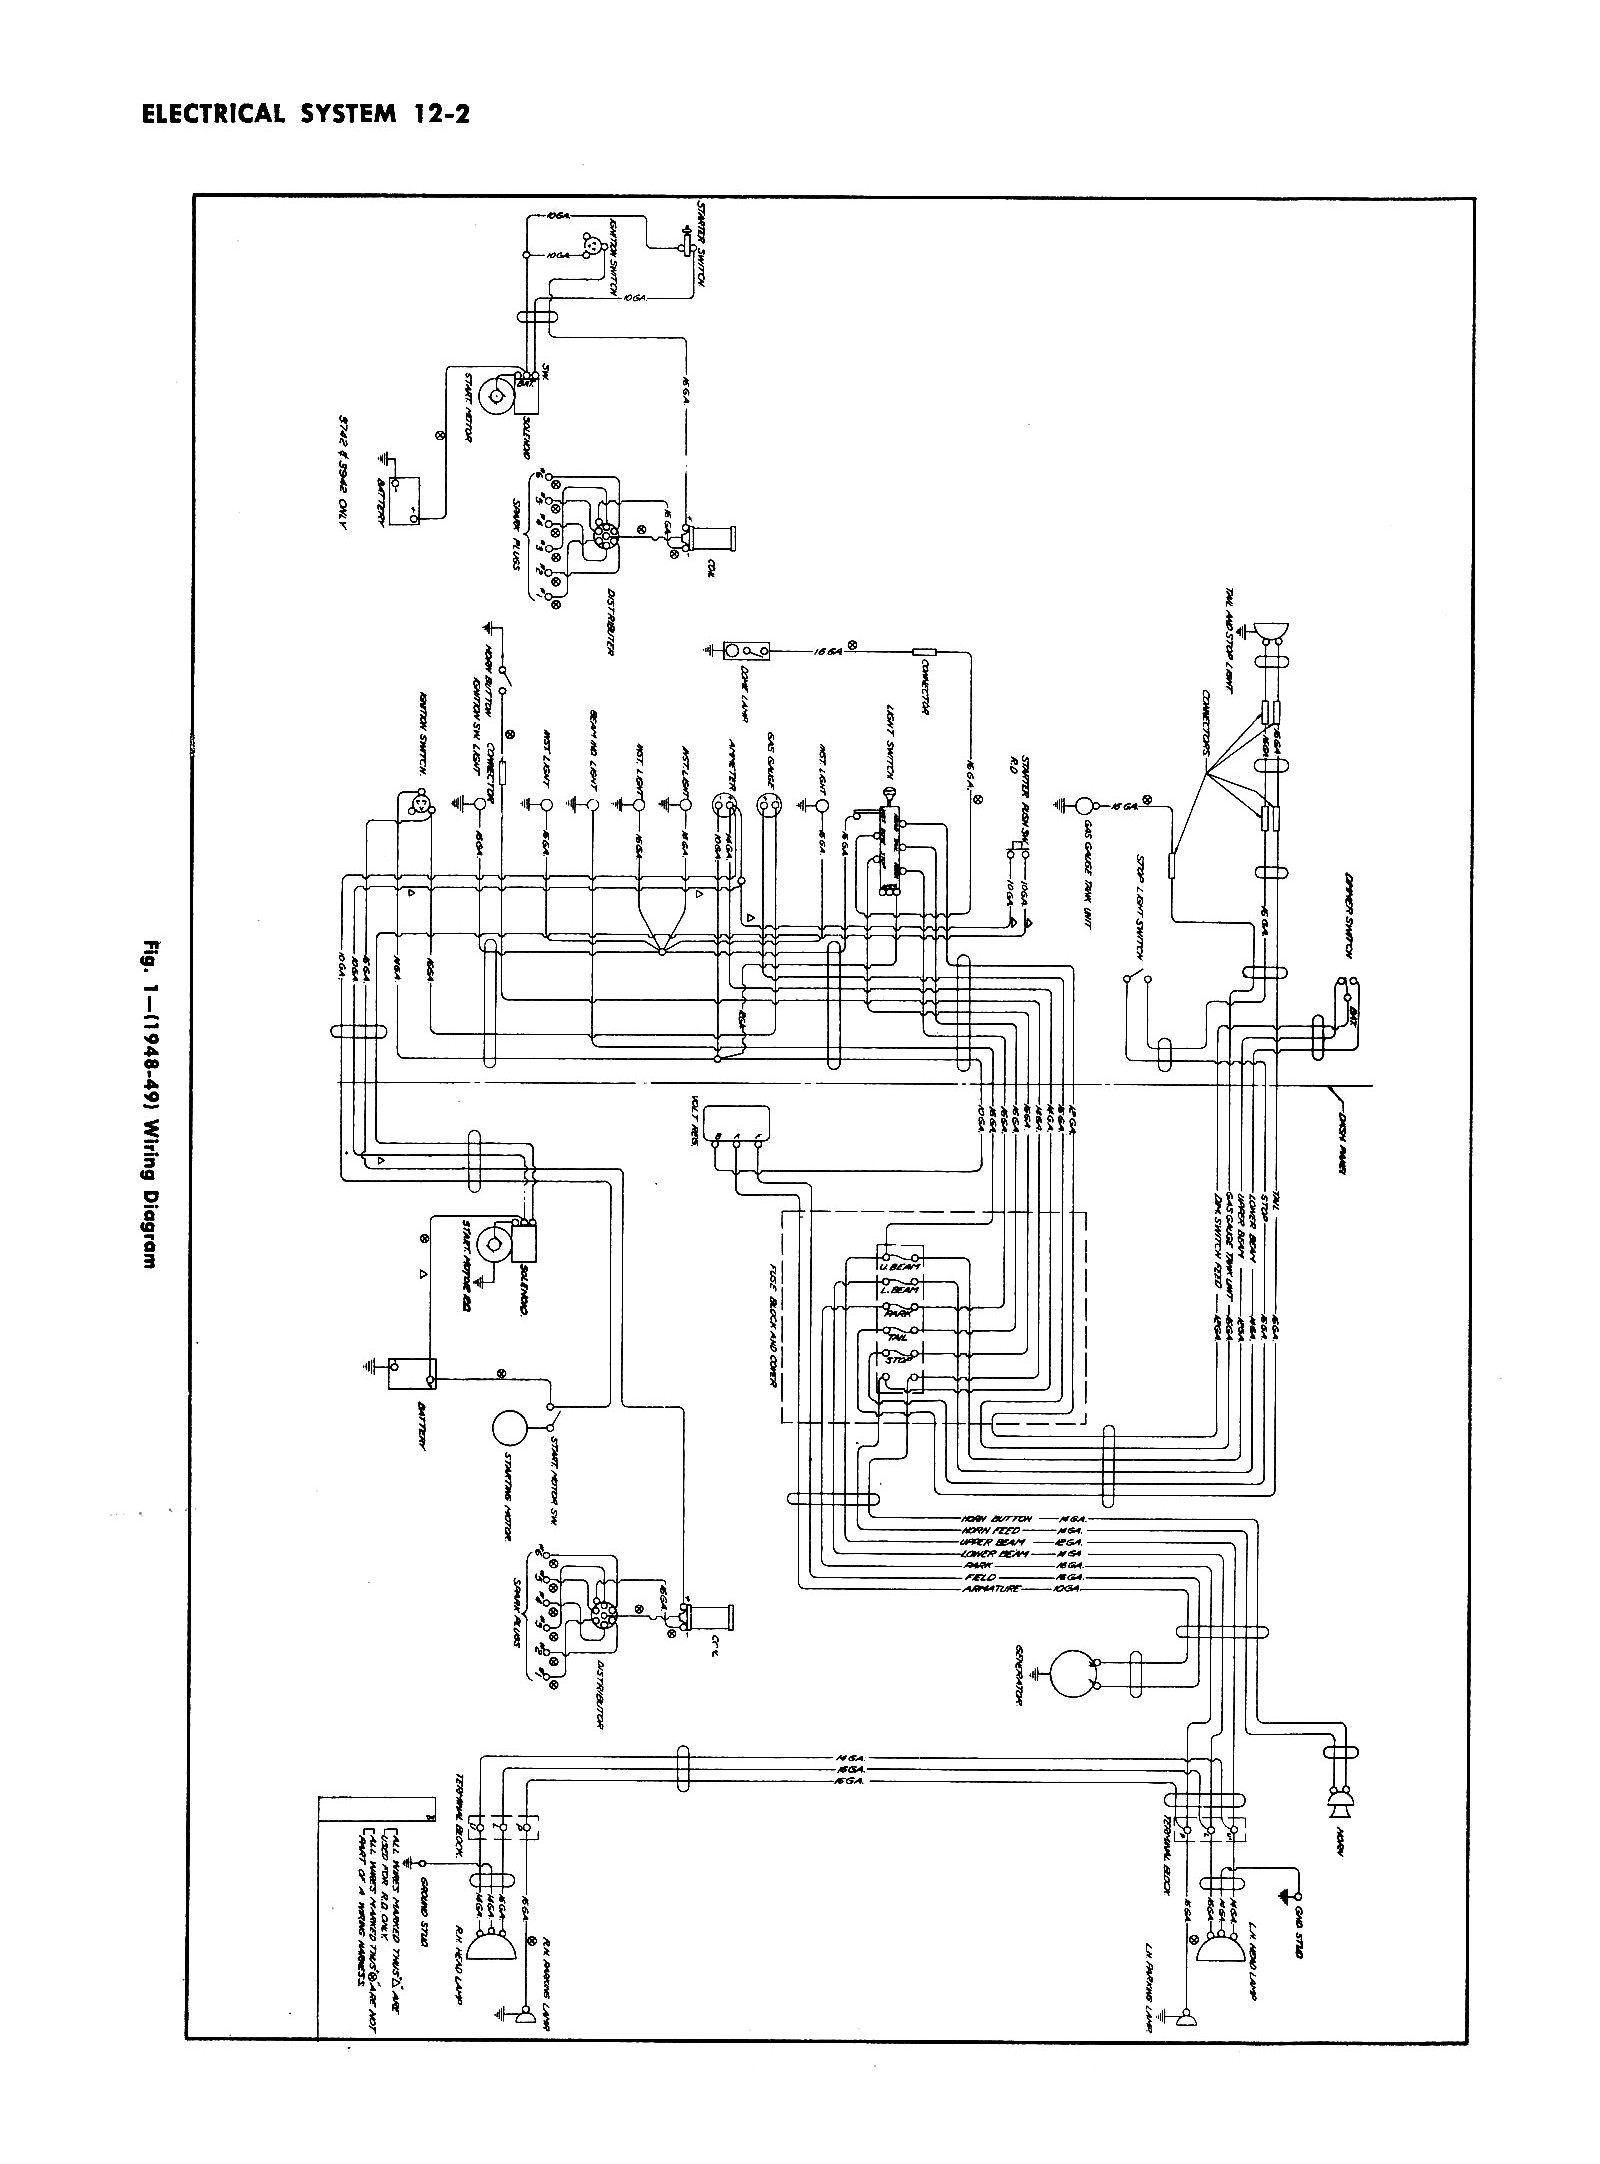 Chevy Wiring diagrams 1948 chevy car wiring diagram 